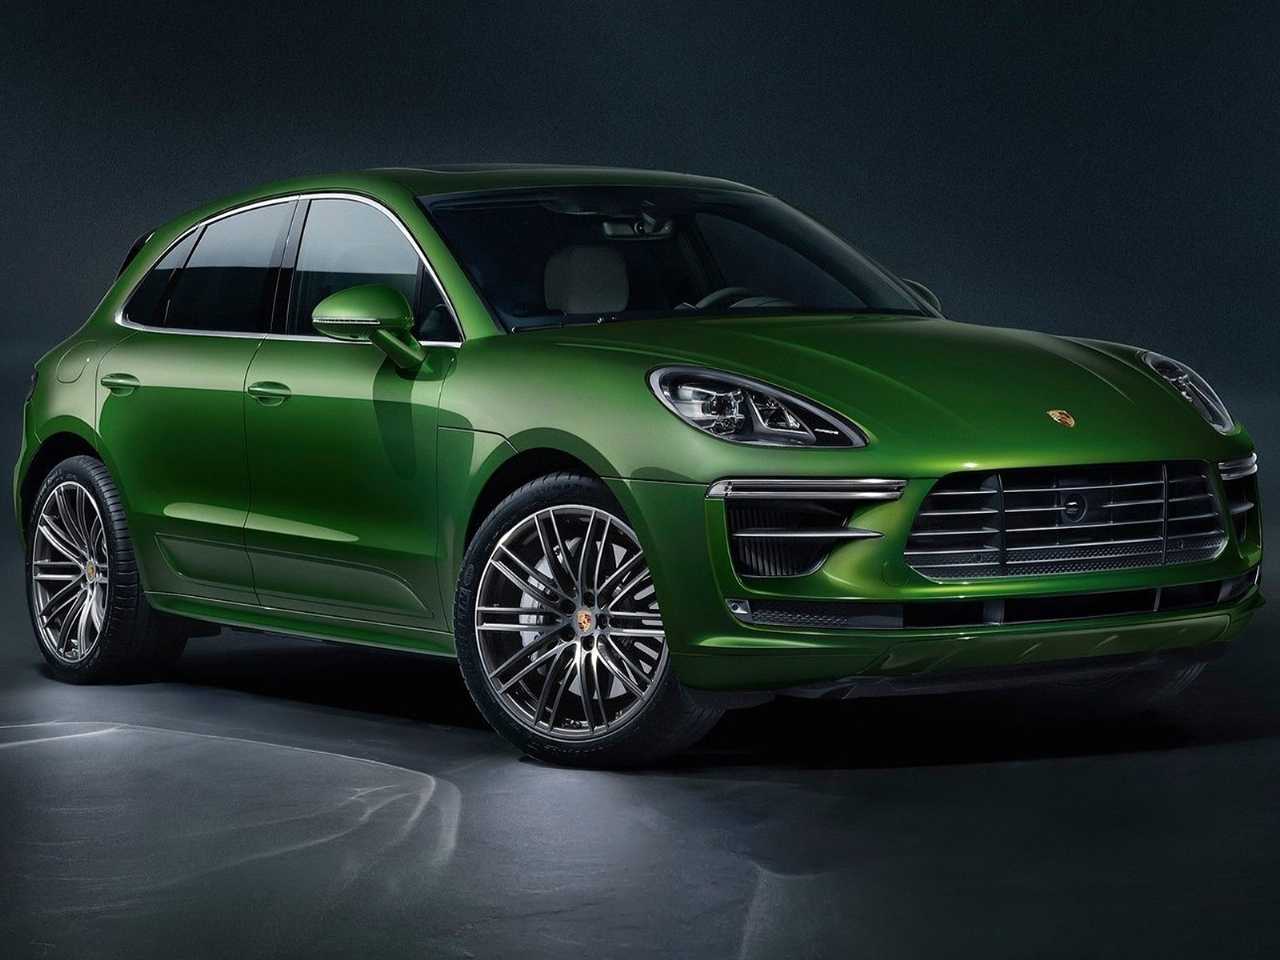 PorscheMacan 2019 - ngulo frontal